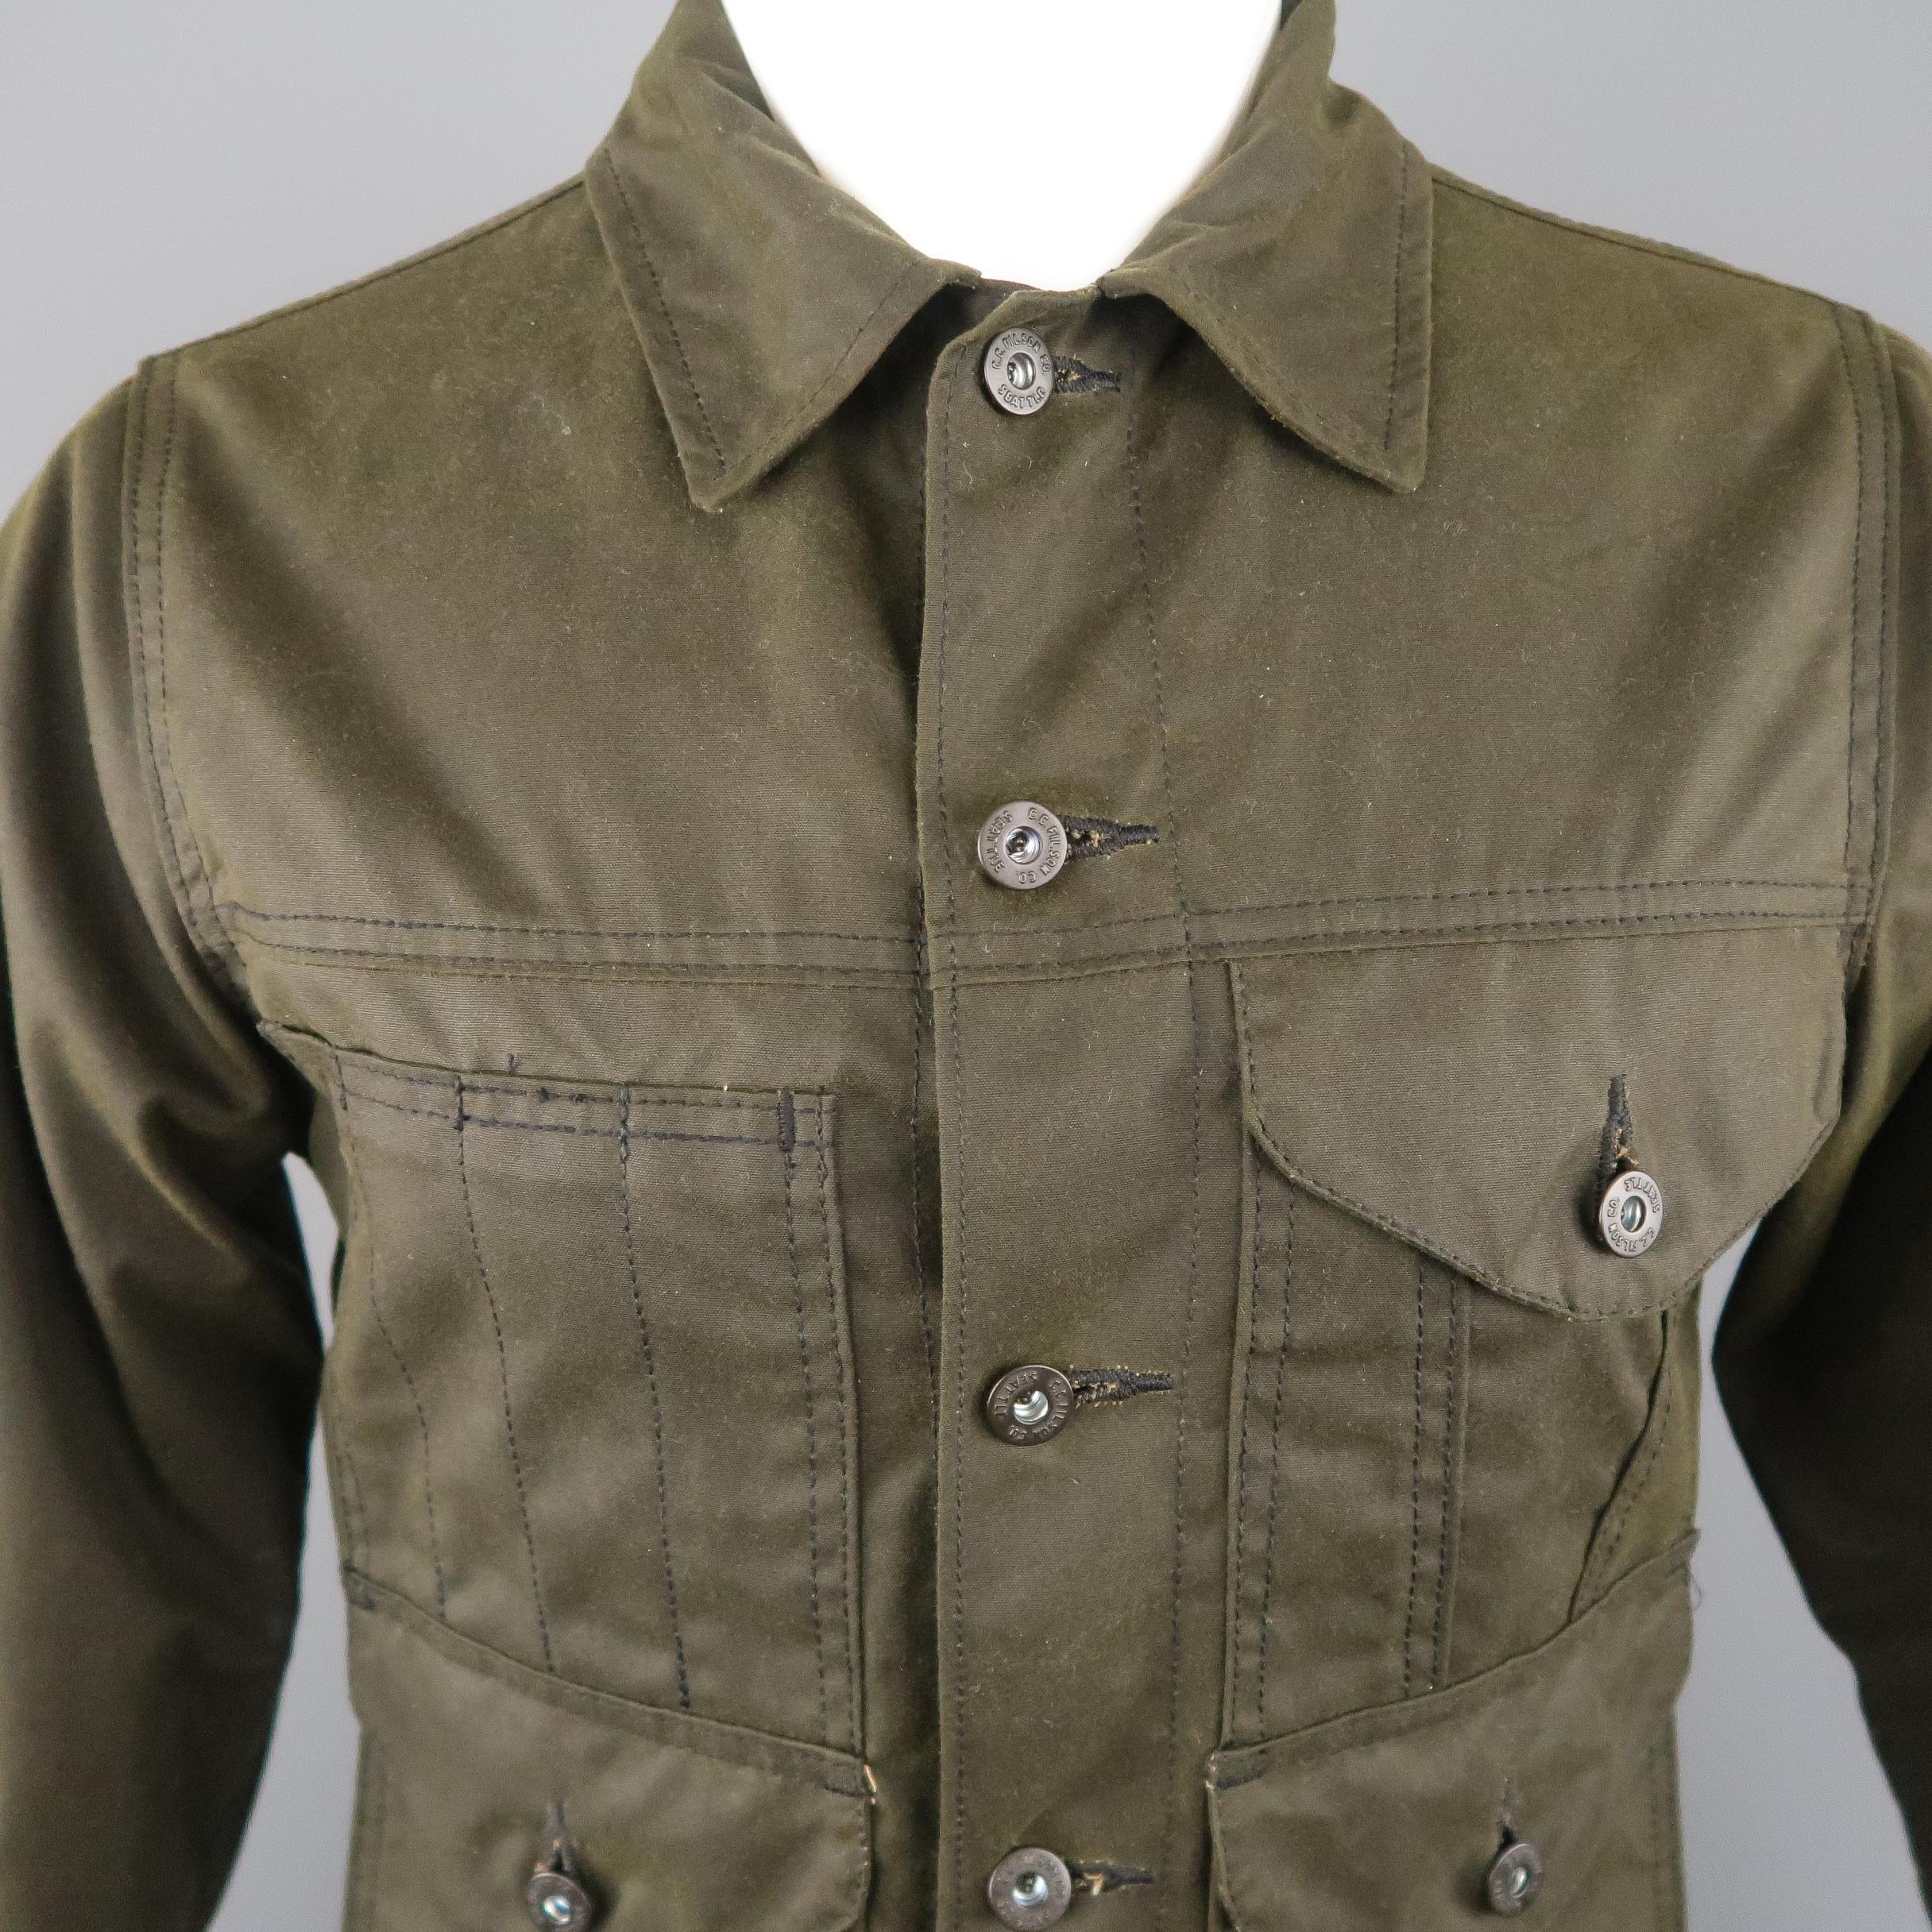 FILSON trucker jacket comes in a distressed olive green waxed cotton with pointed collar, patch flap pockets, patch tool pocket, and waistband tabs. Made in USA.
 
New with Tags.
Marked: XS
 
Measurements:
 
Shoulder: 16 in.
Chest: 39 in.
Sleeve: